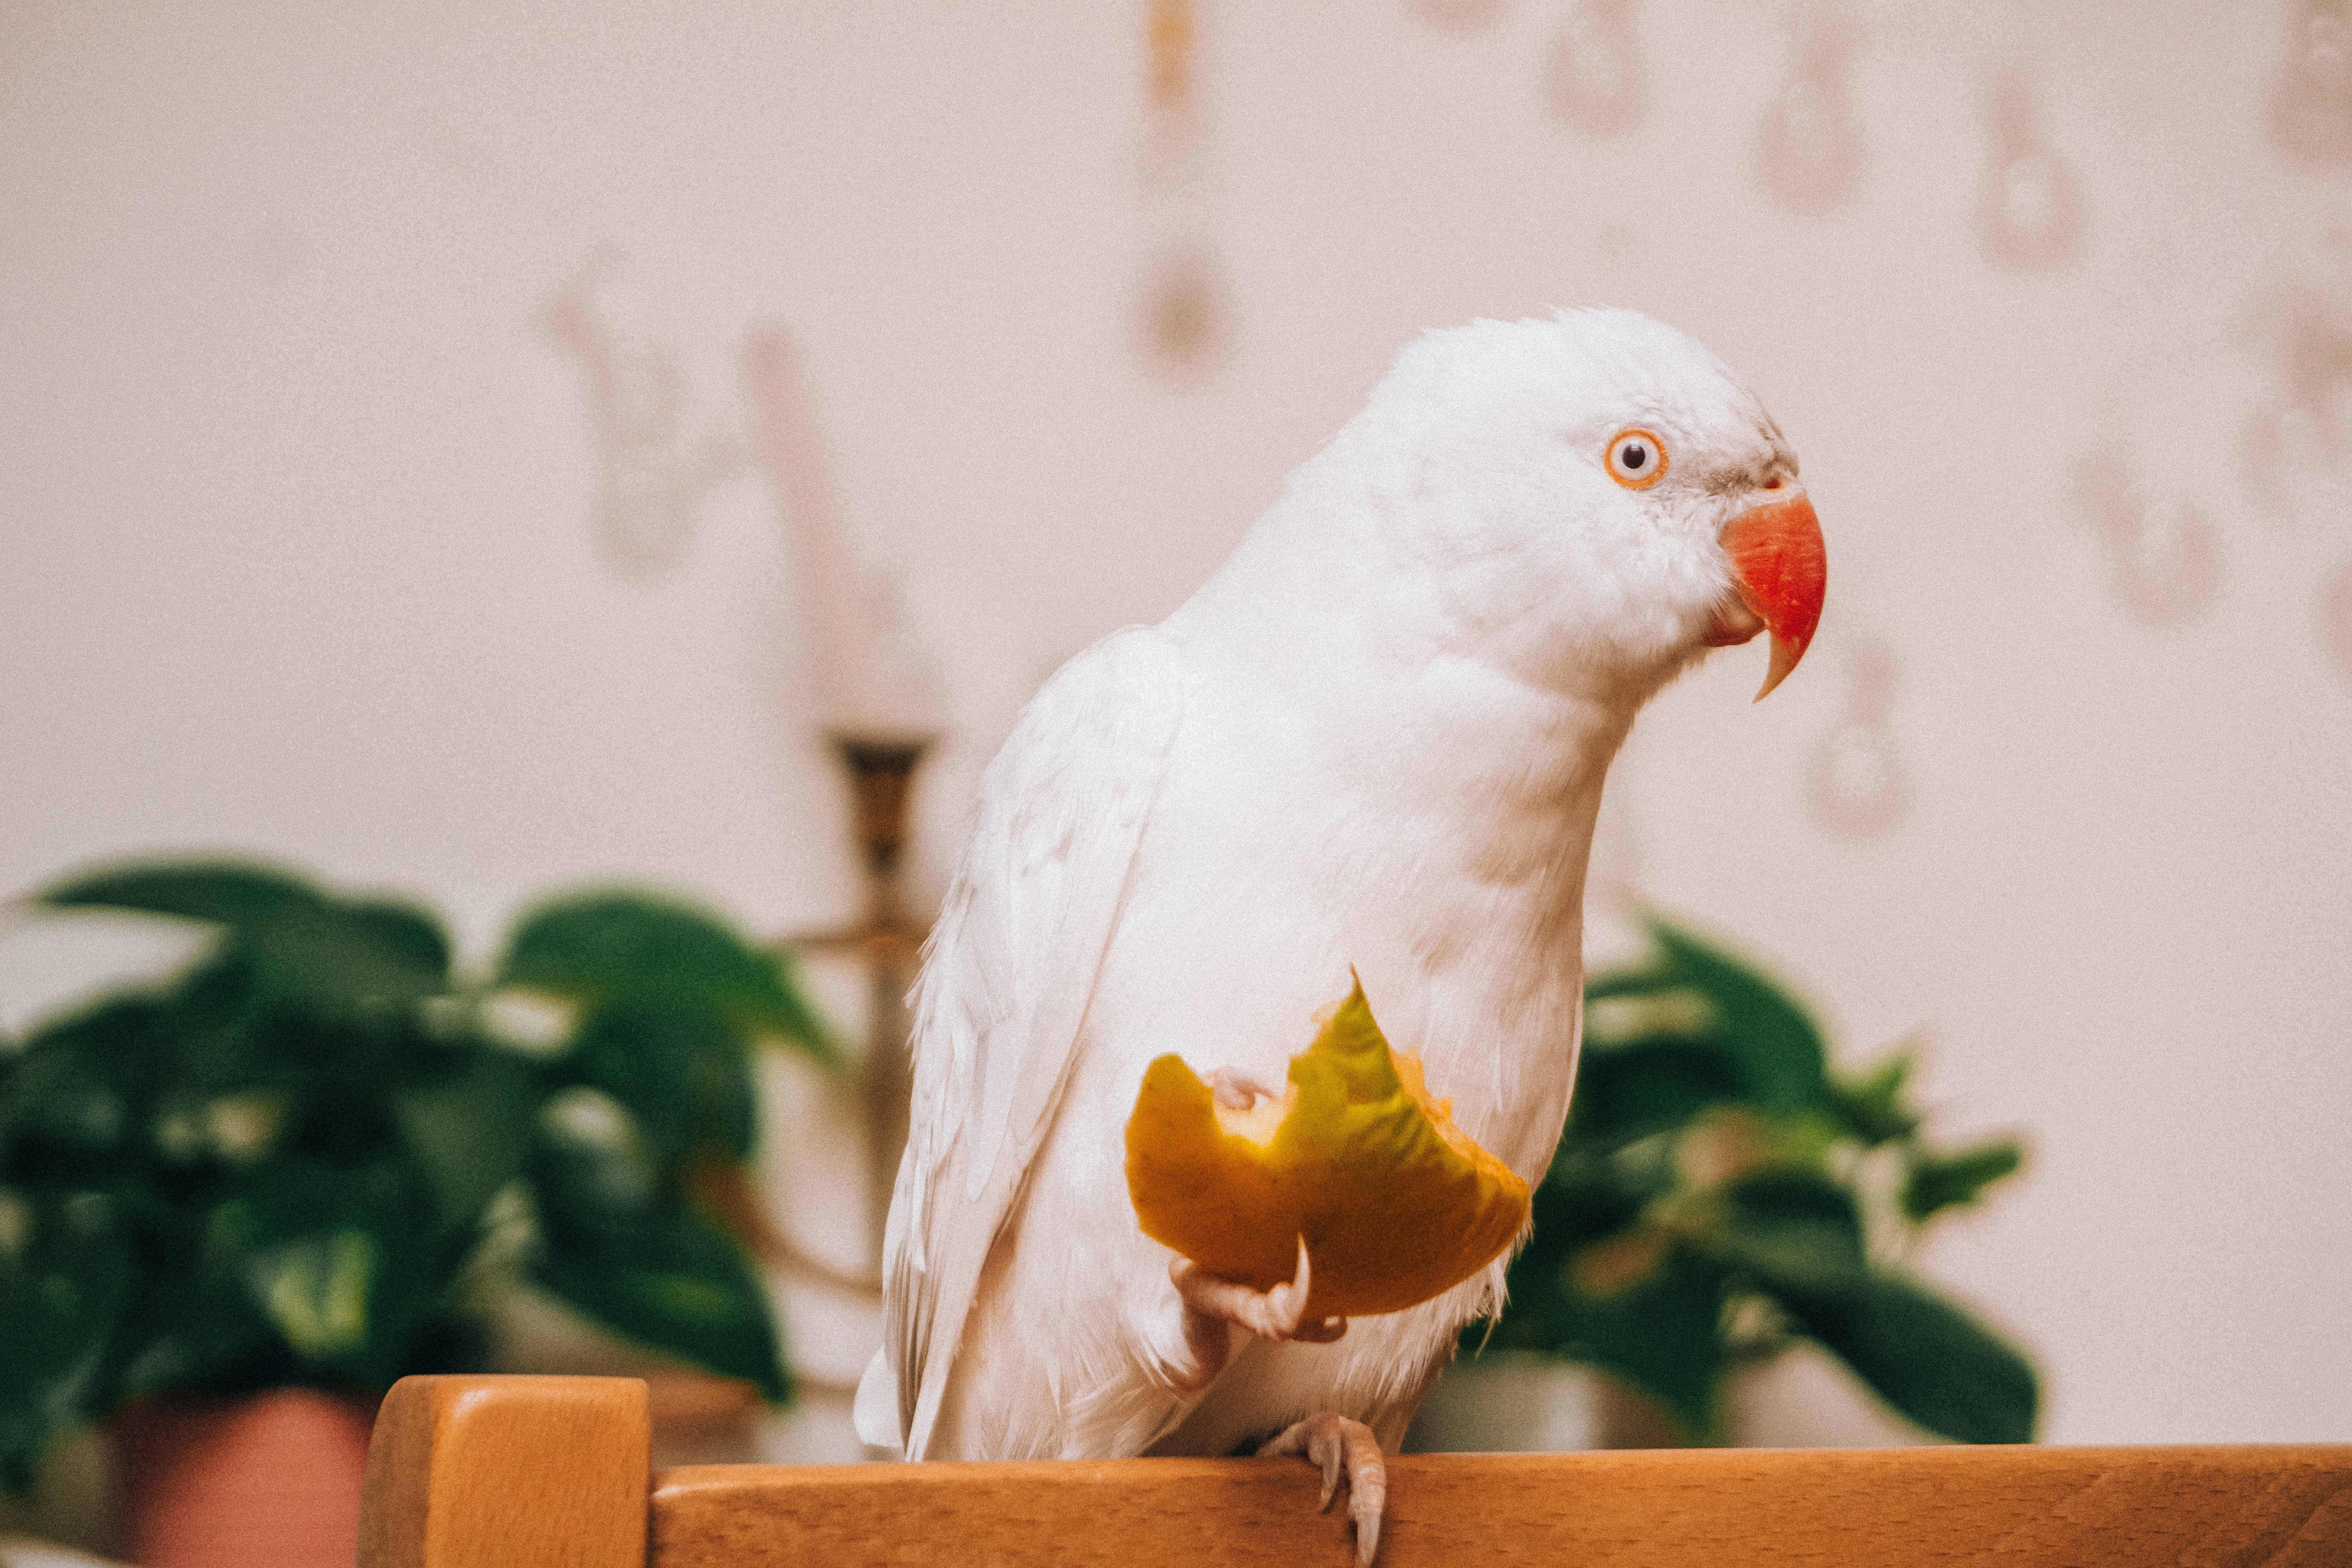 Before she died, Emma made Adam promise to take care of her beloved pet parrot, Max. | Source: Pexels